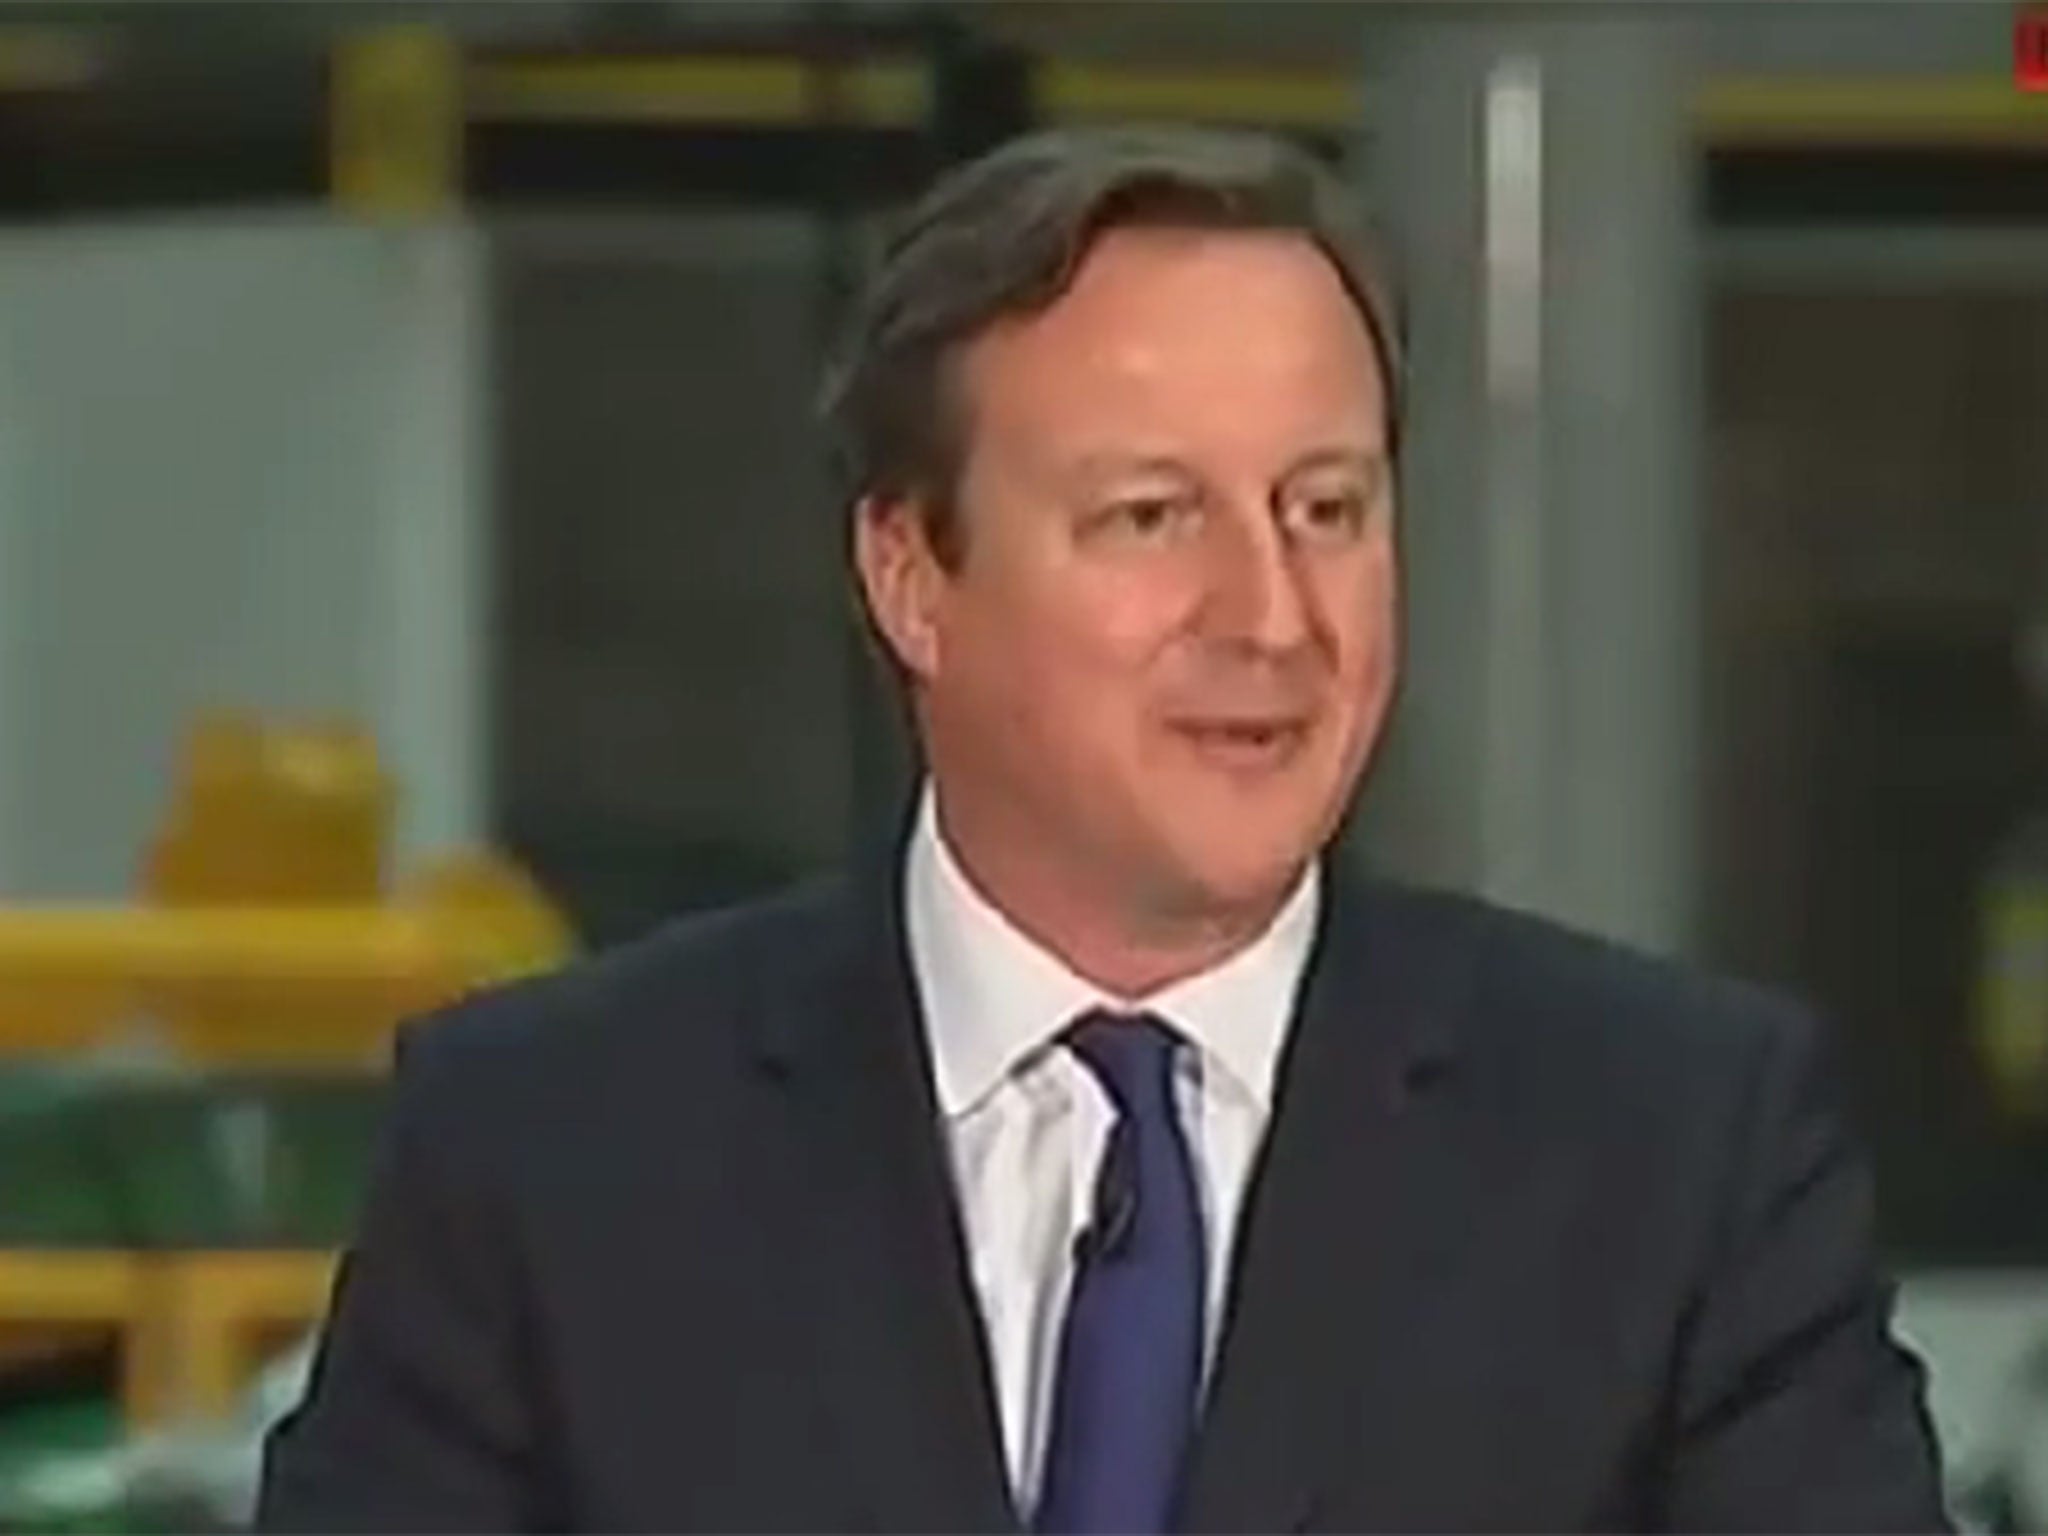 Prime Minister David Cameron delivers his speech on immigration.